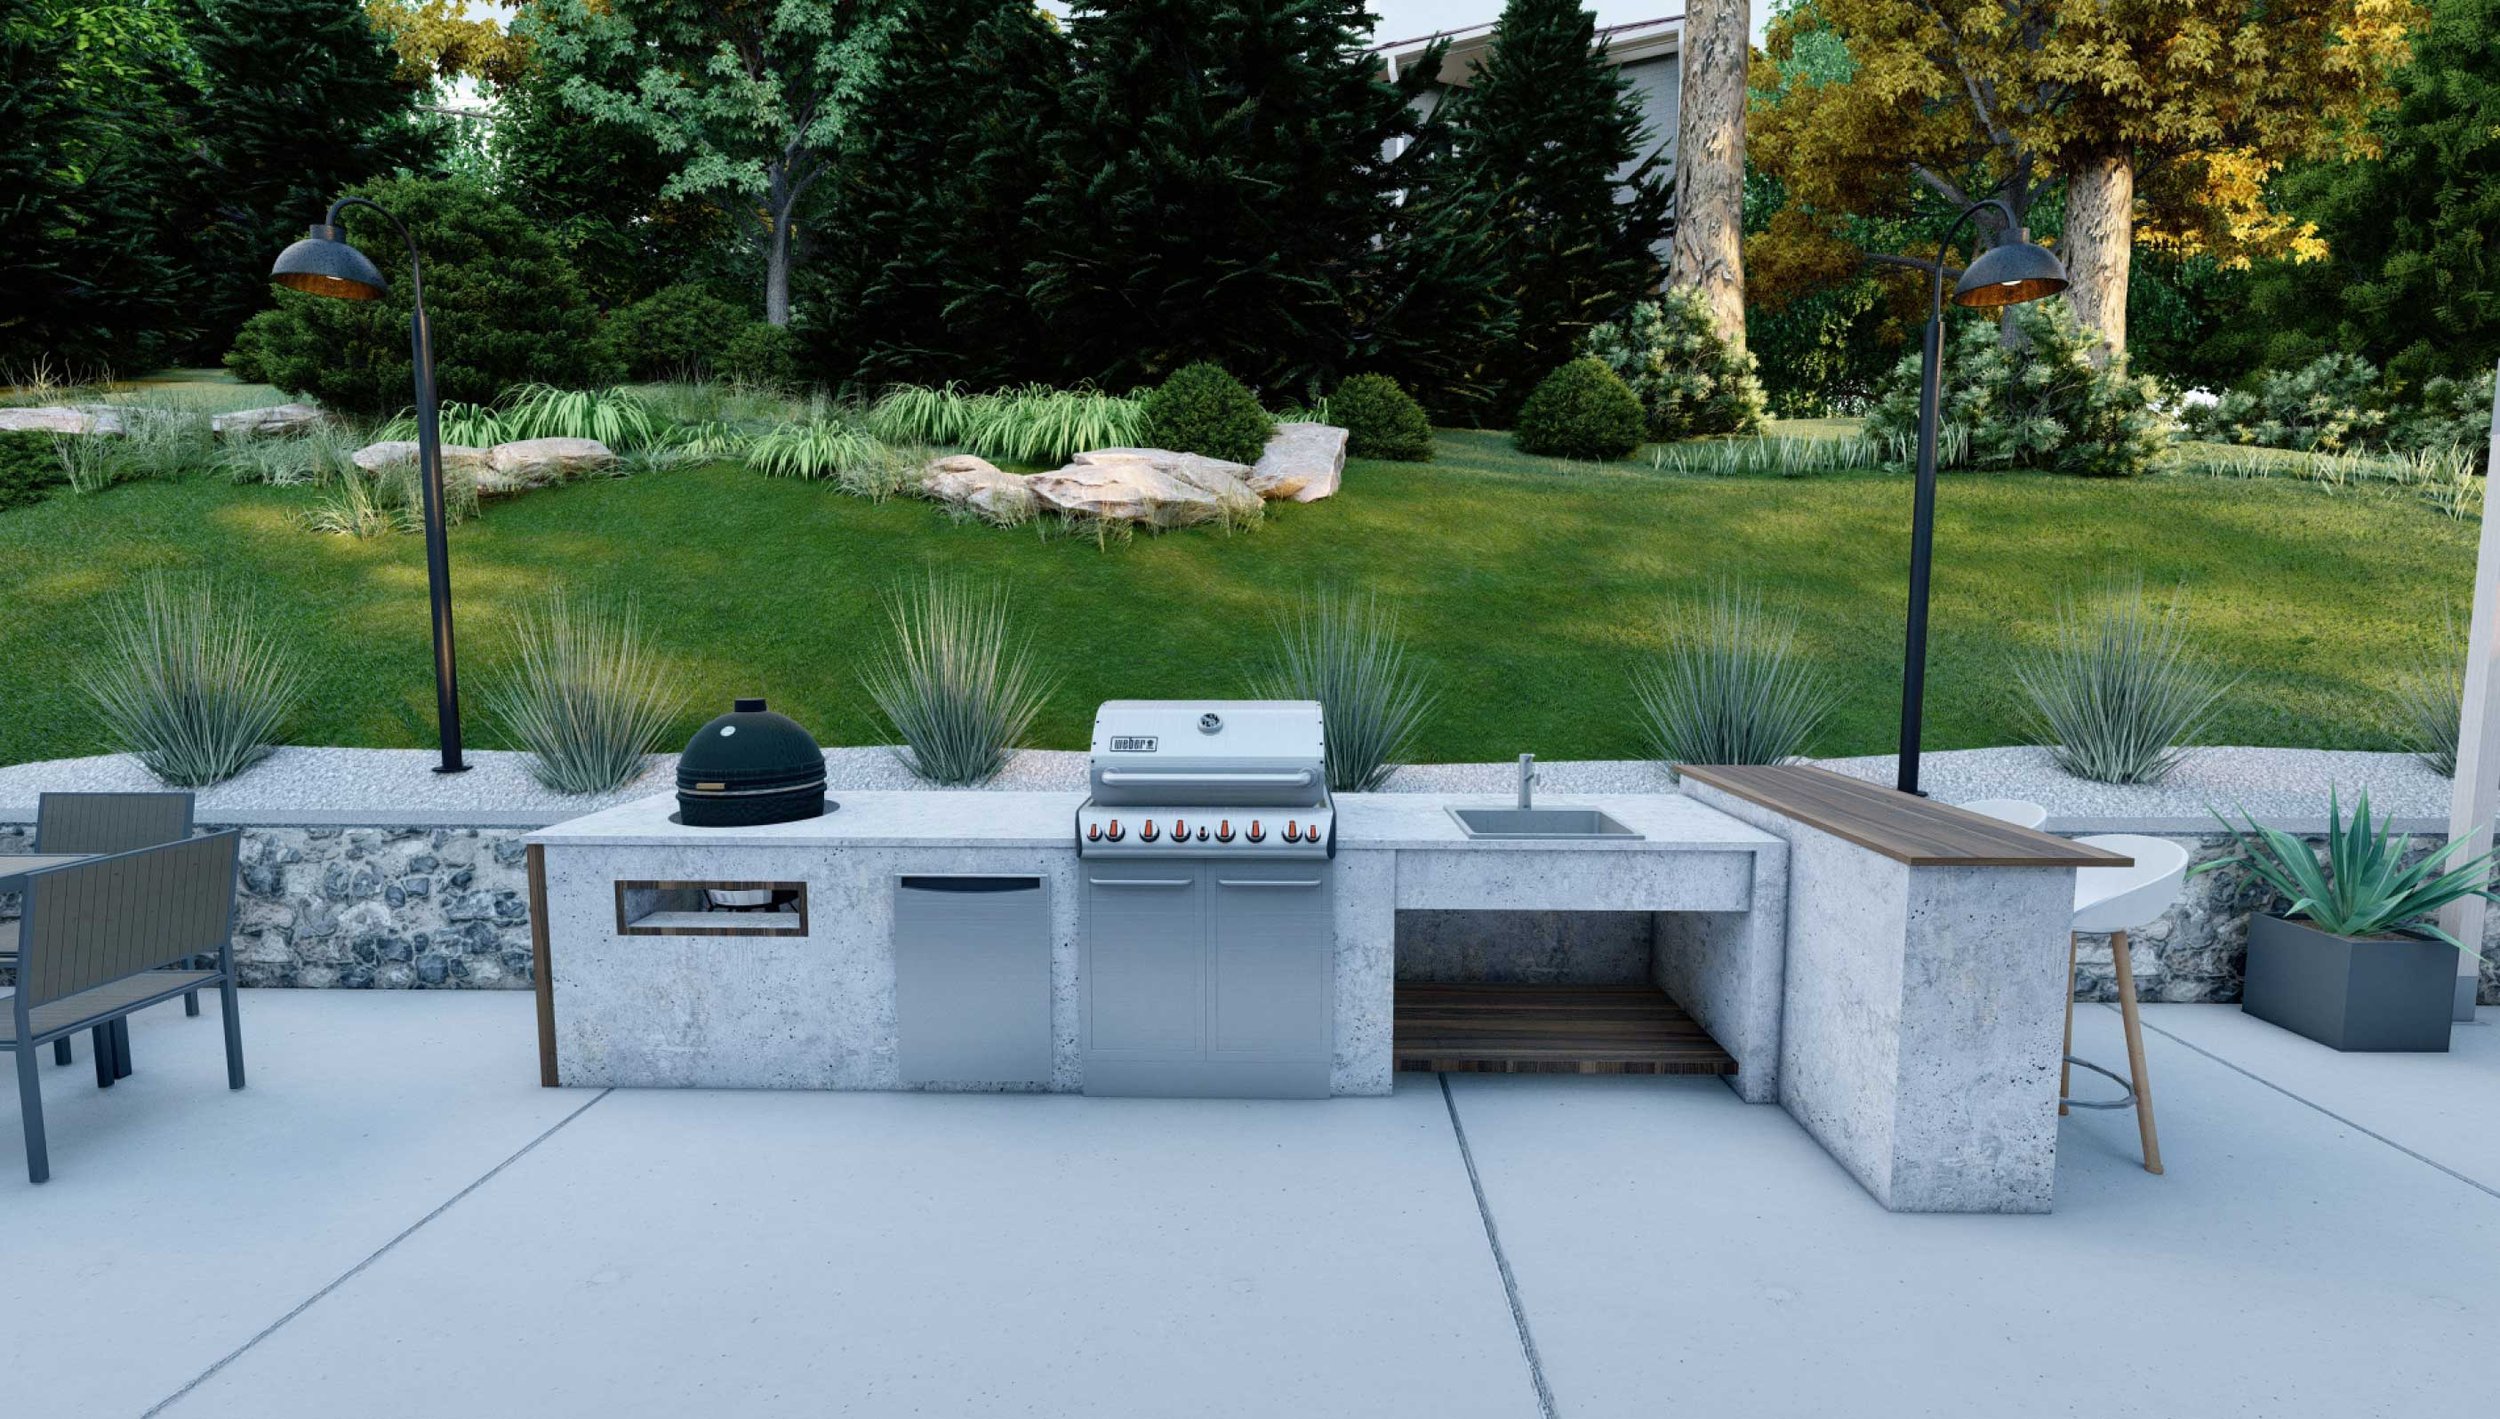 Modern outdoor kitchen with built-in gas grill, charcoal grill, sink, and mini fridge in Millburn, New Jersey back yard design